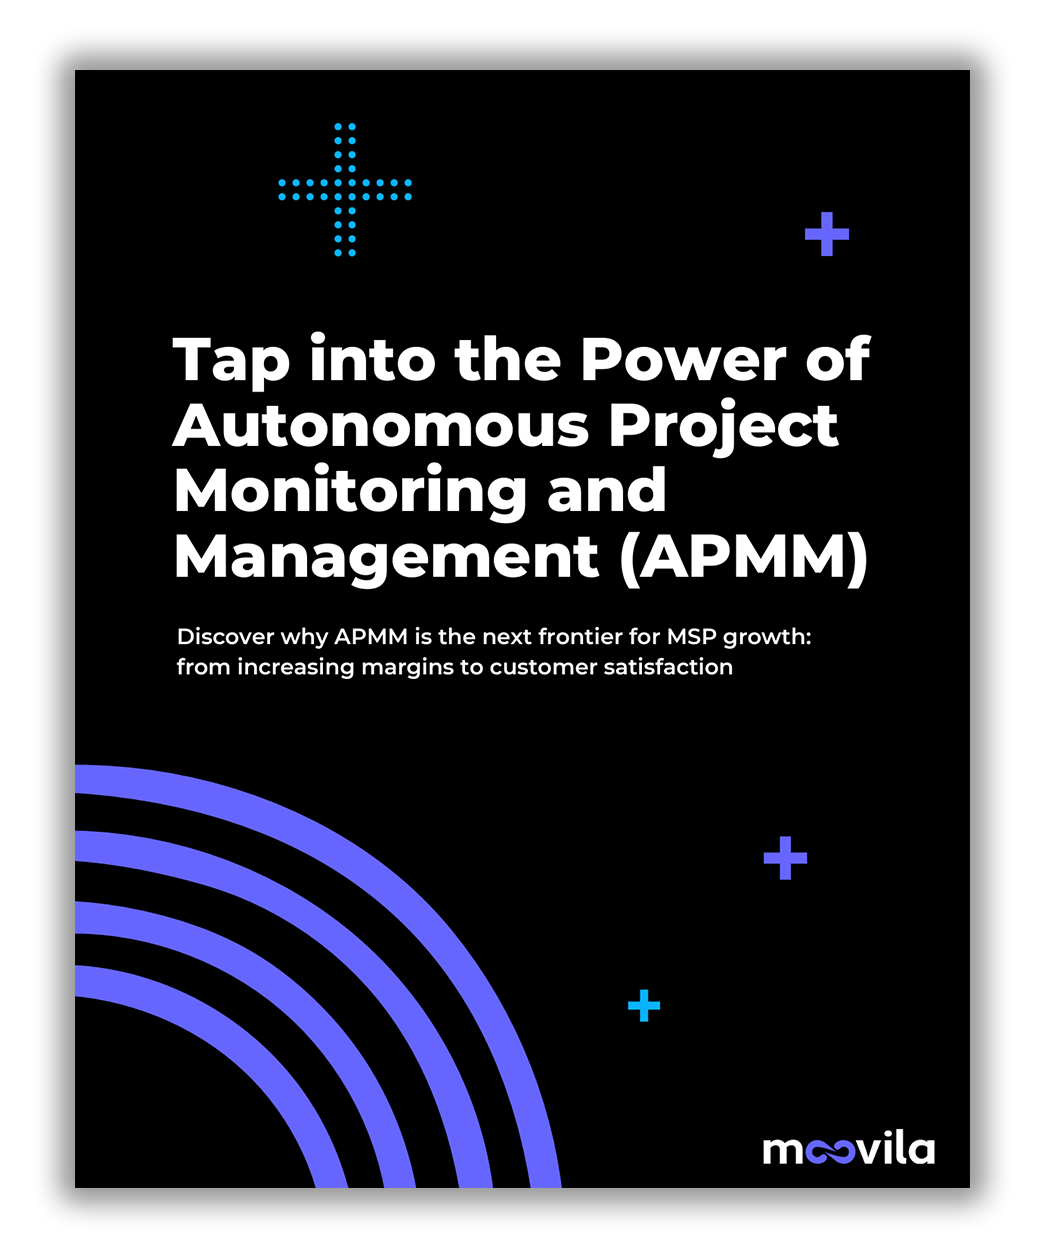 Tap into the Power of Autonomous Project Monitoring and Management (APMM)